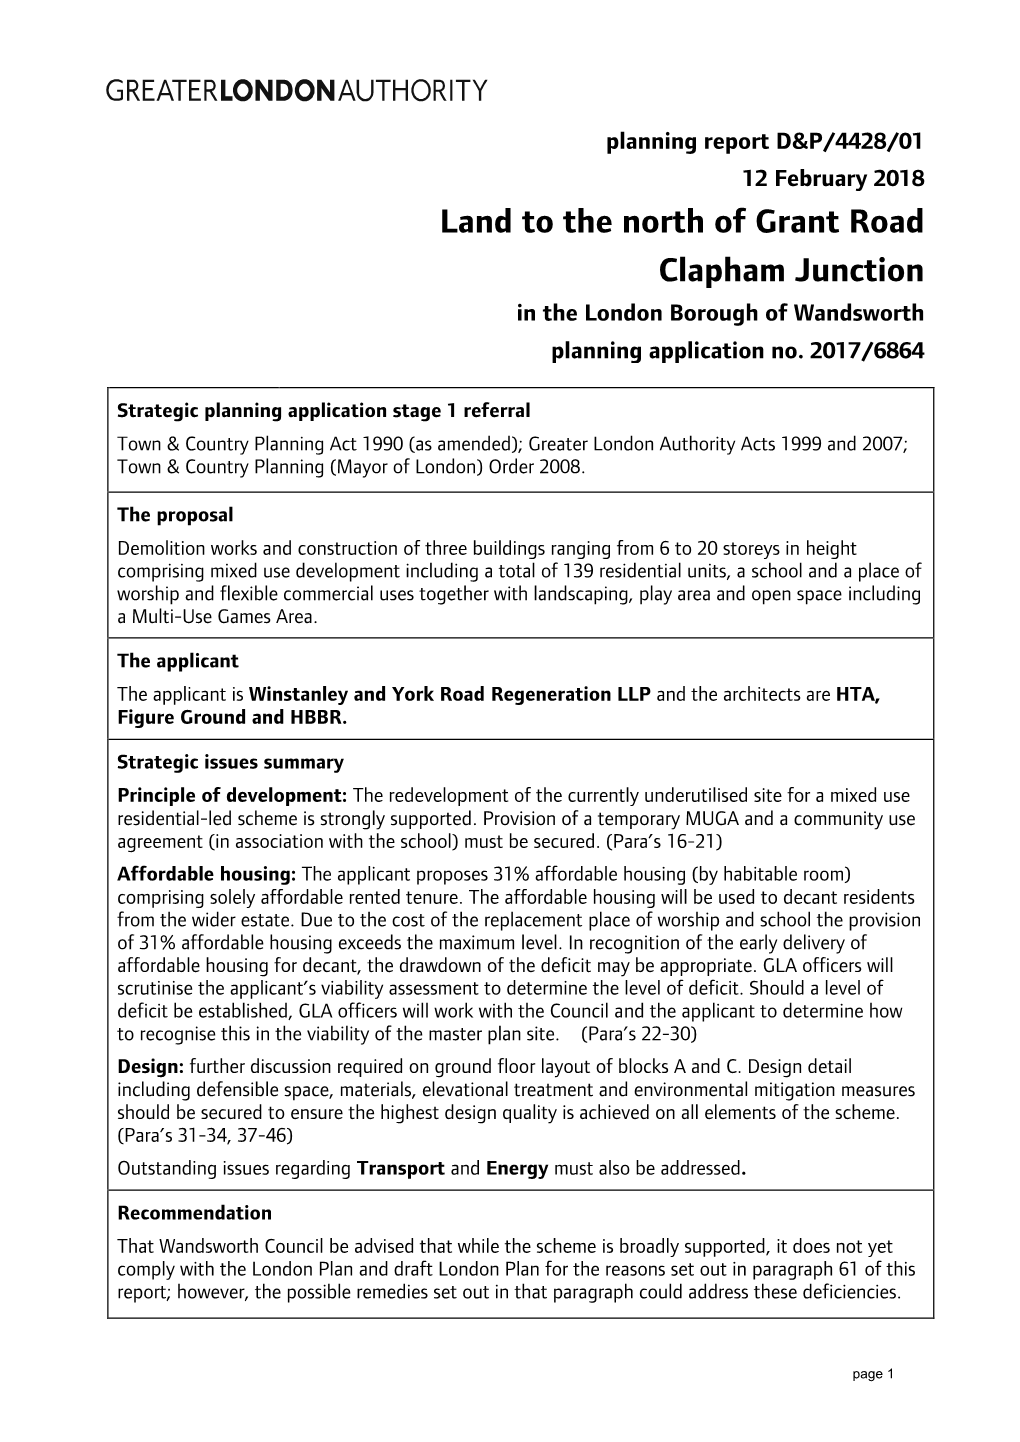 Land to the North of Grant Road Clapham Junction in the London Borough of Wandsworth Planning Application No